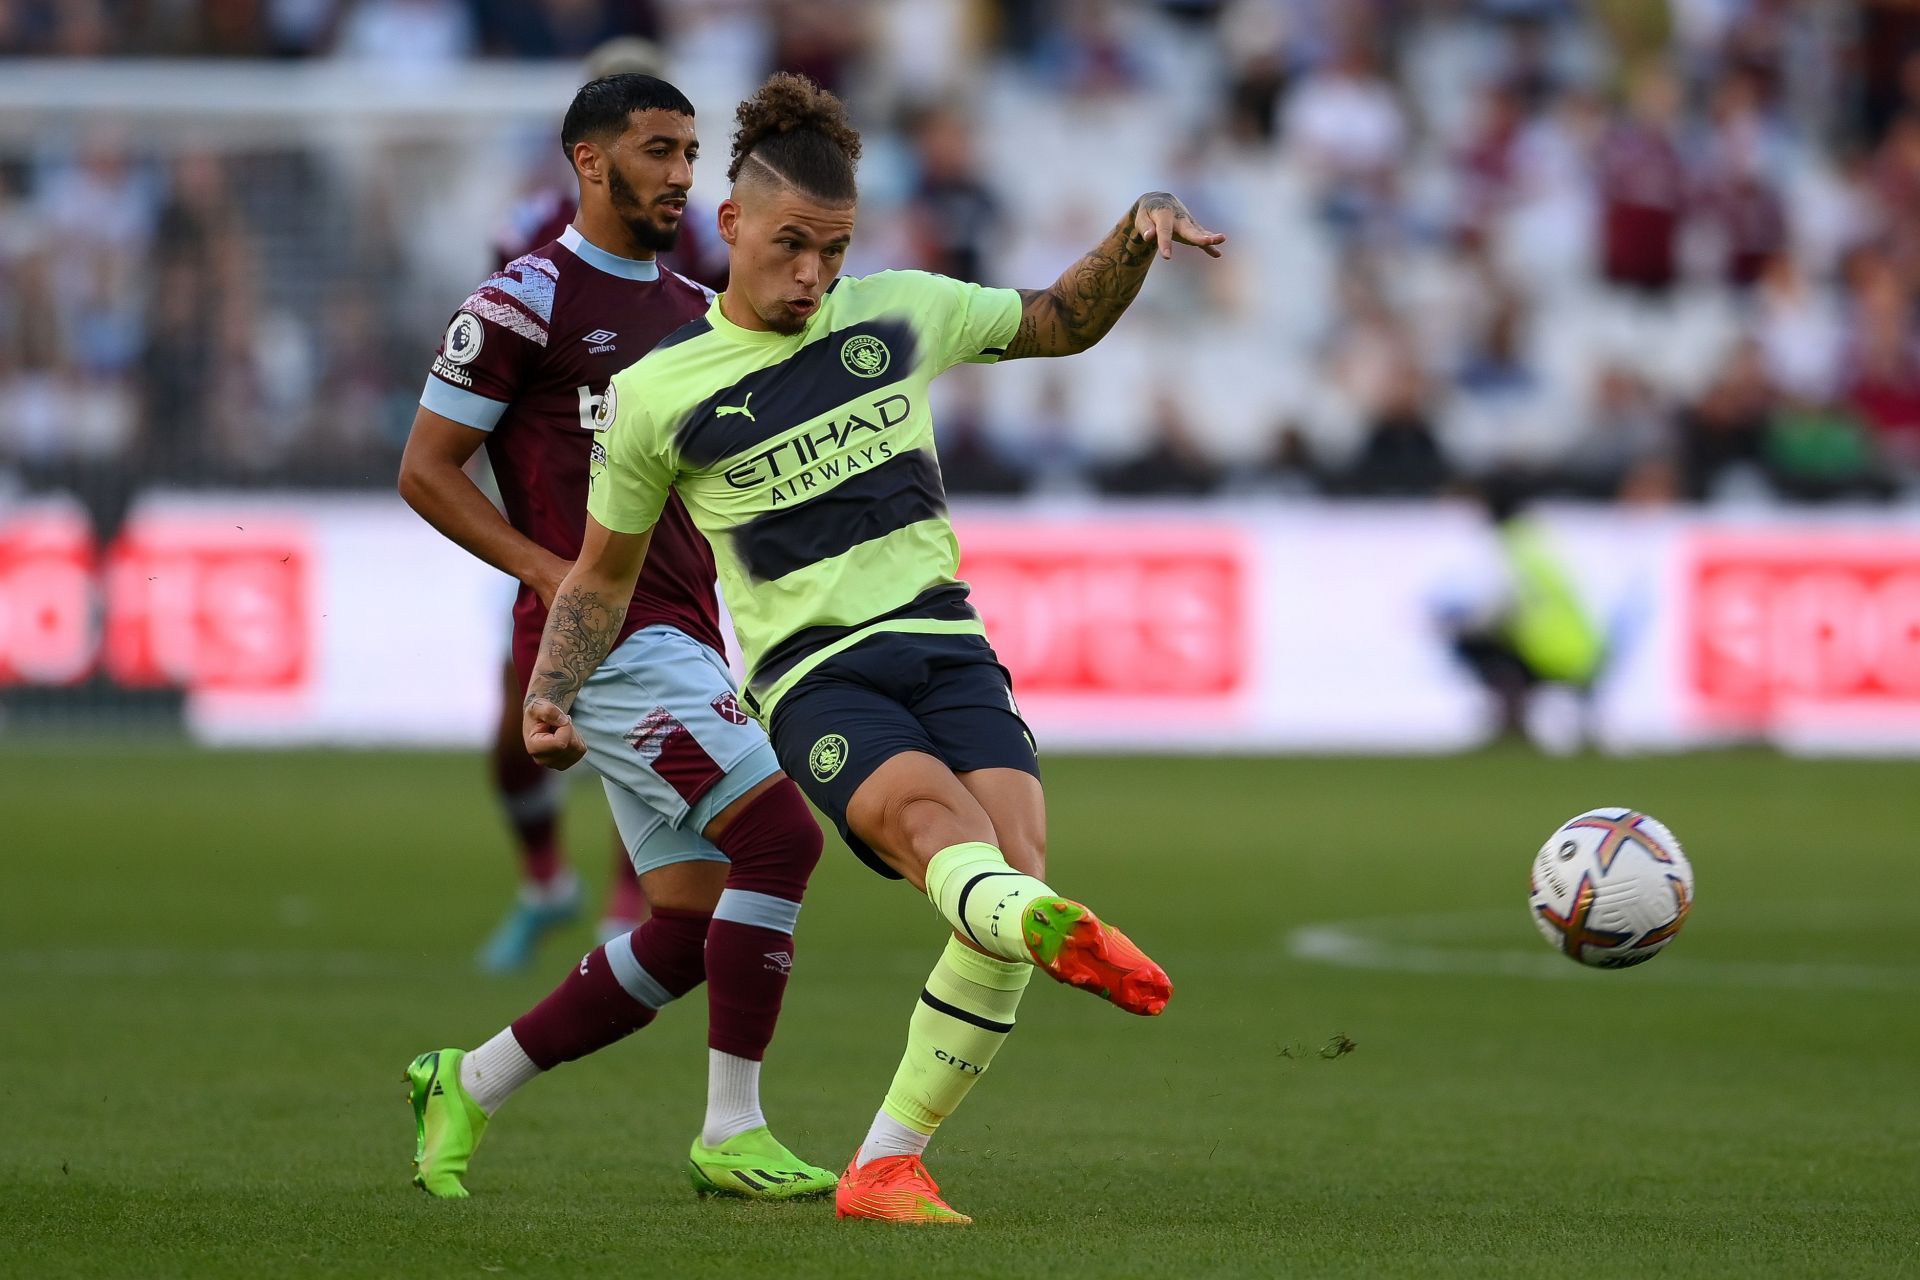 Kalvin Phillips joined Manchester City from Leeds United this summer.